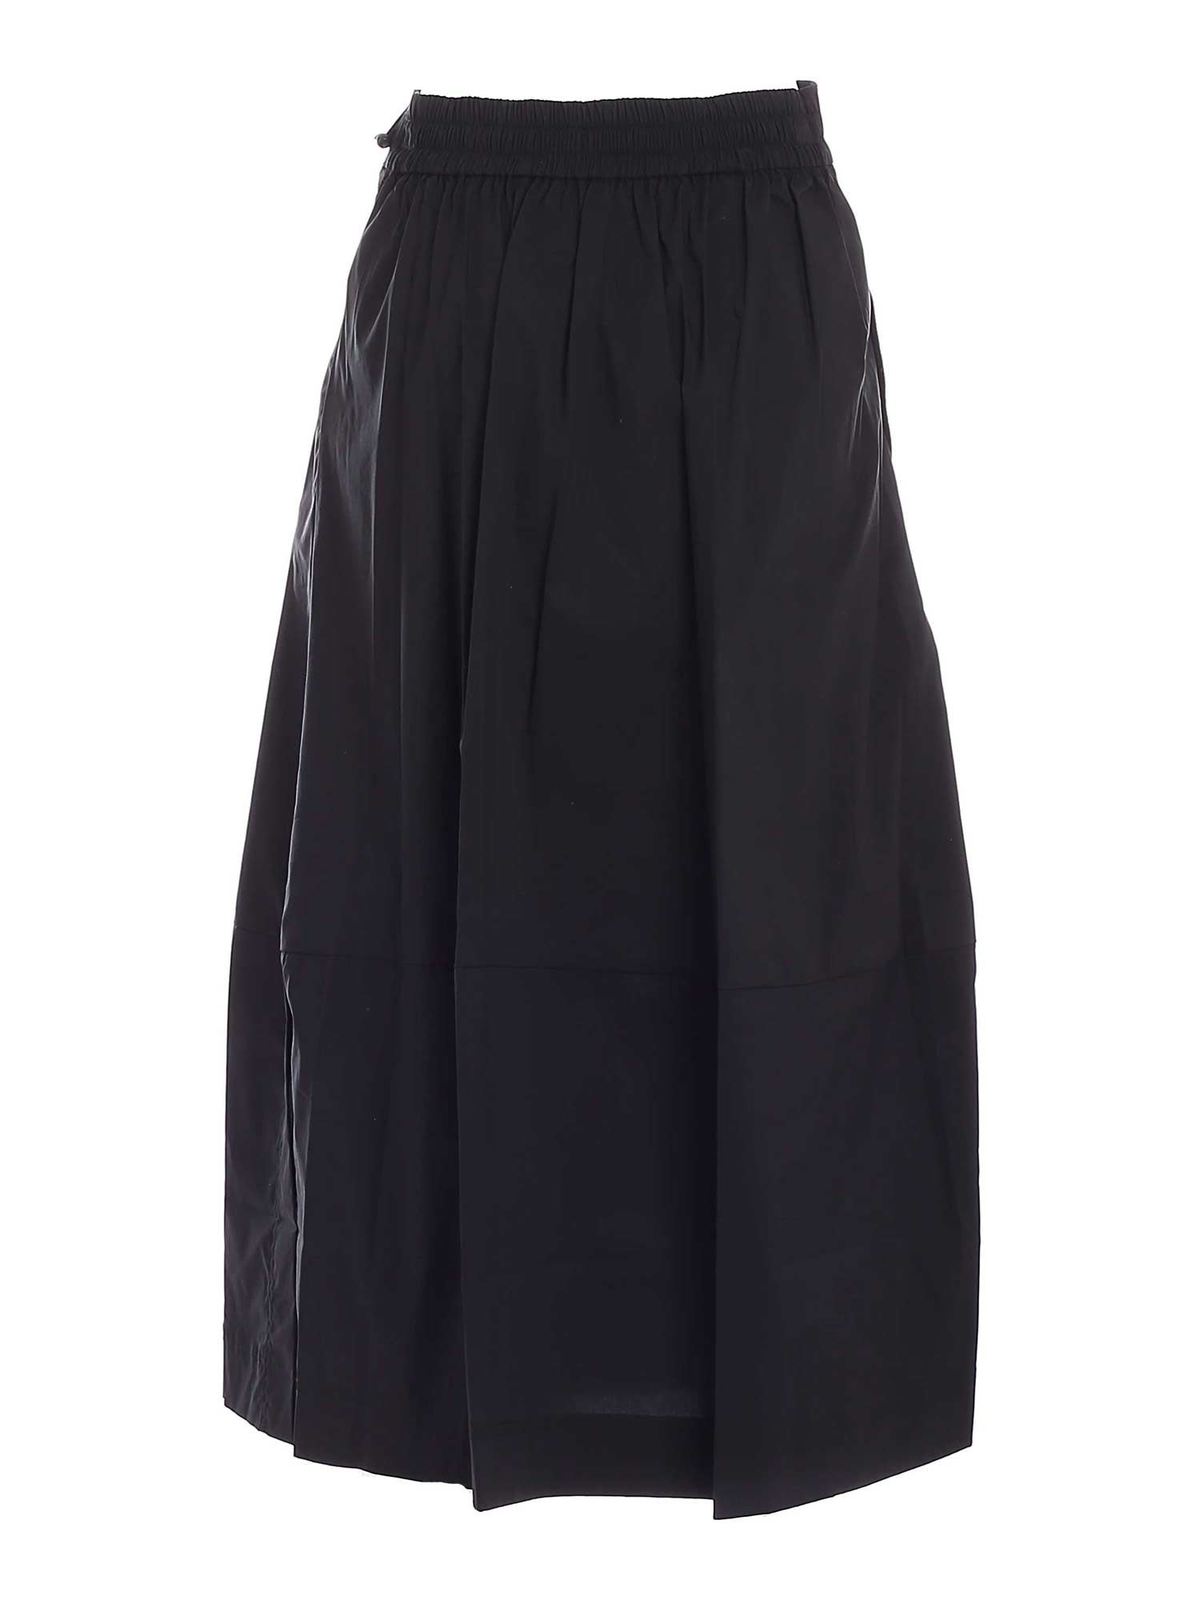 Dkny - Double vent flared skirt in black - Long skirts - P0DN0FK9BLK